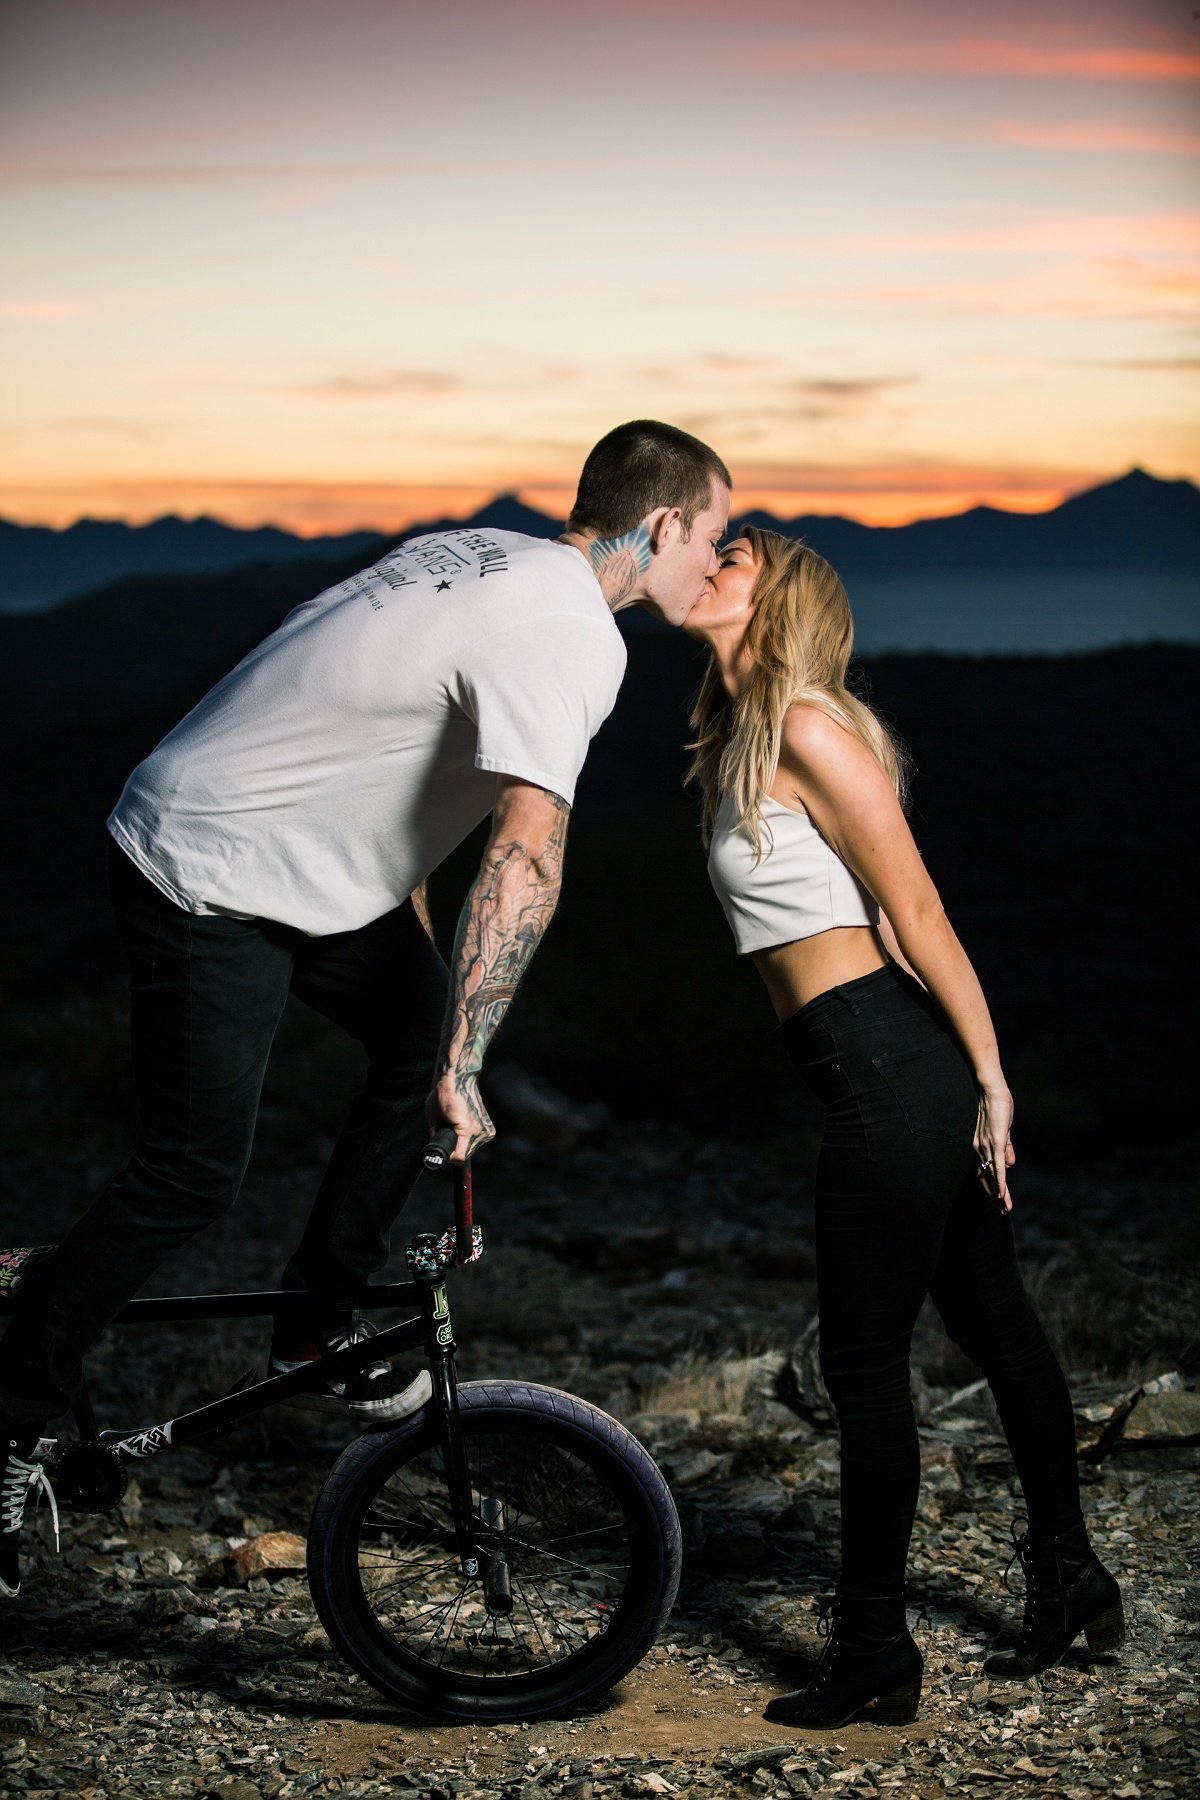 Groom to be stands over his bike and leans in for a kiss from his fiance